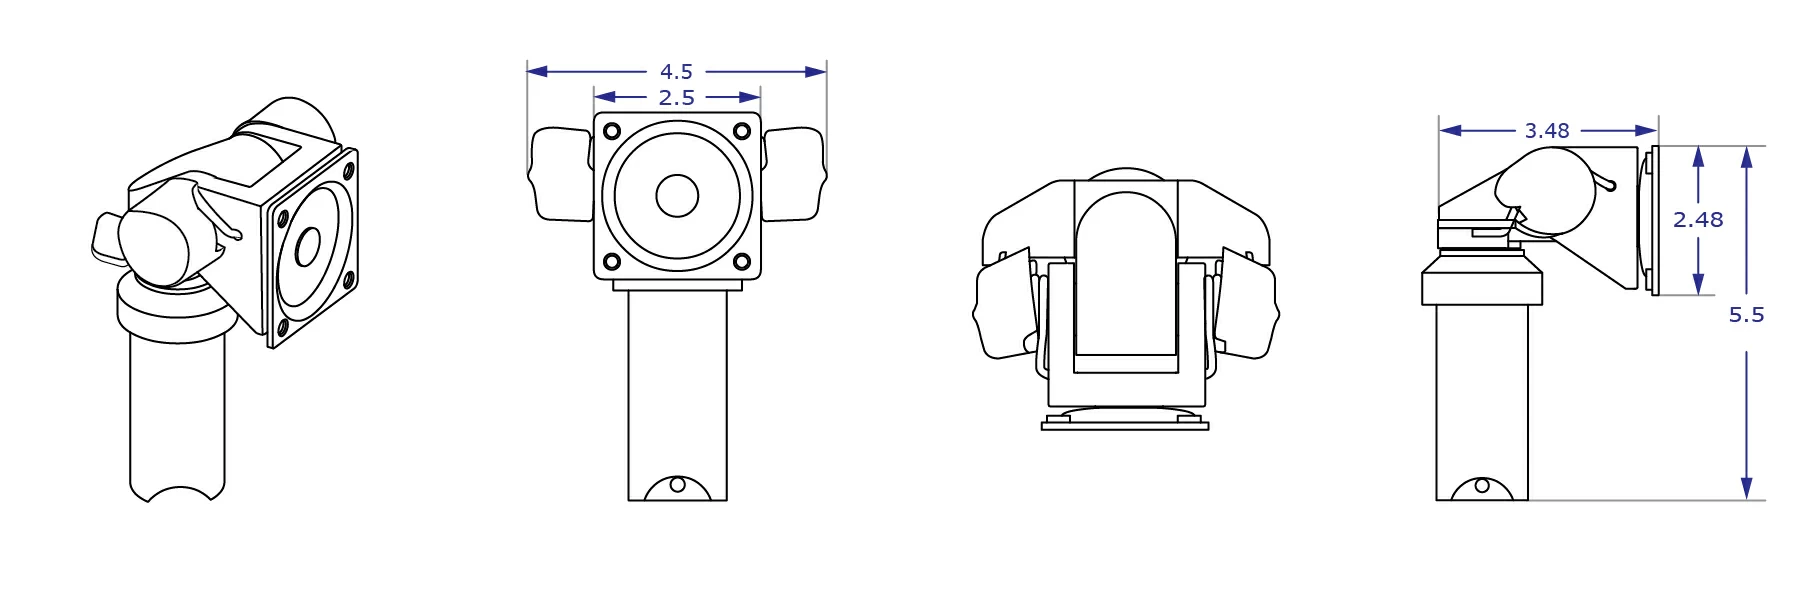 PM90 pole top monitor mount with HD tilter head attached specification drawing showing front, top and side views with measurements